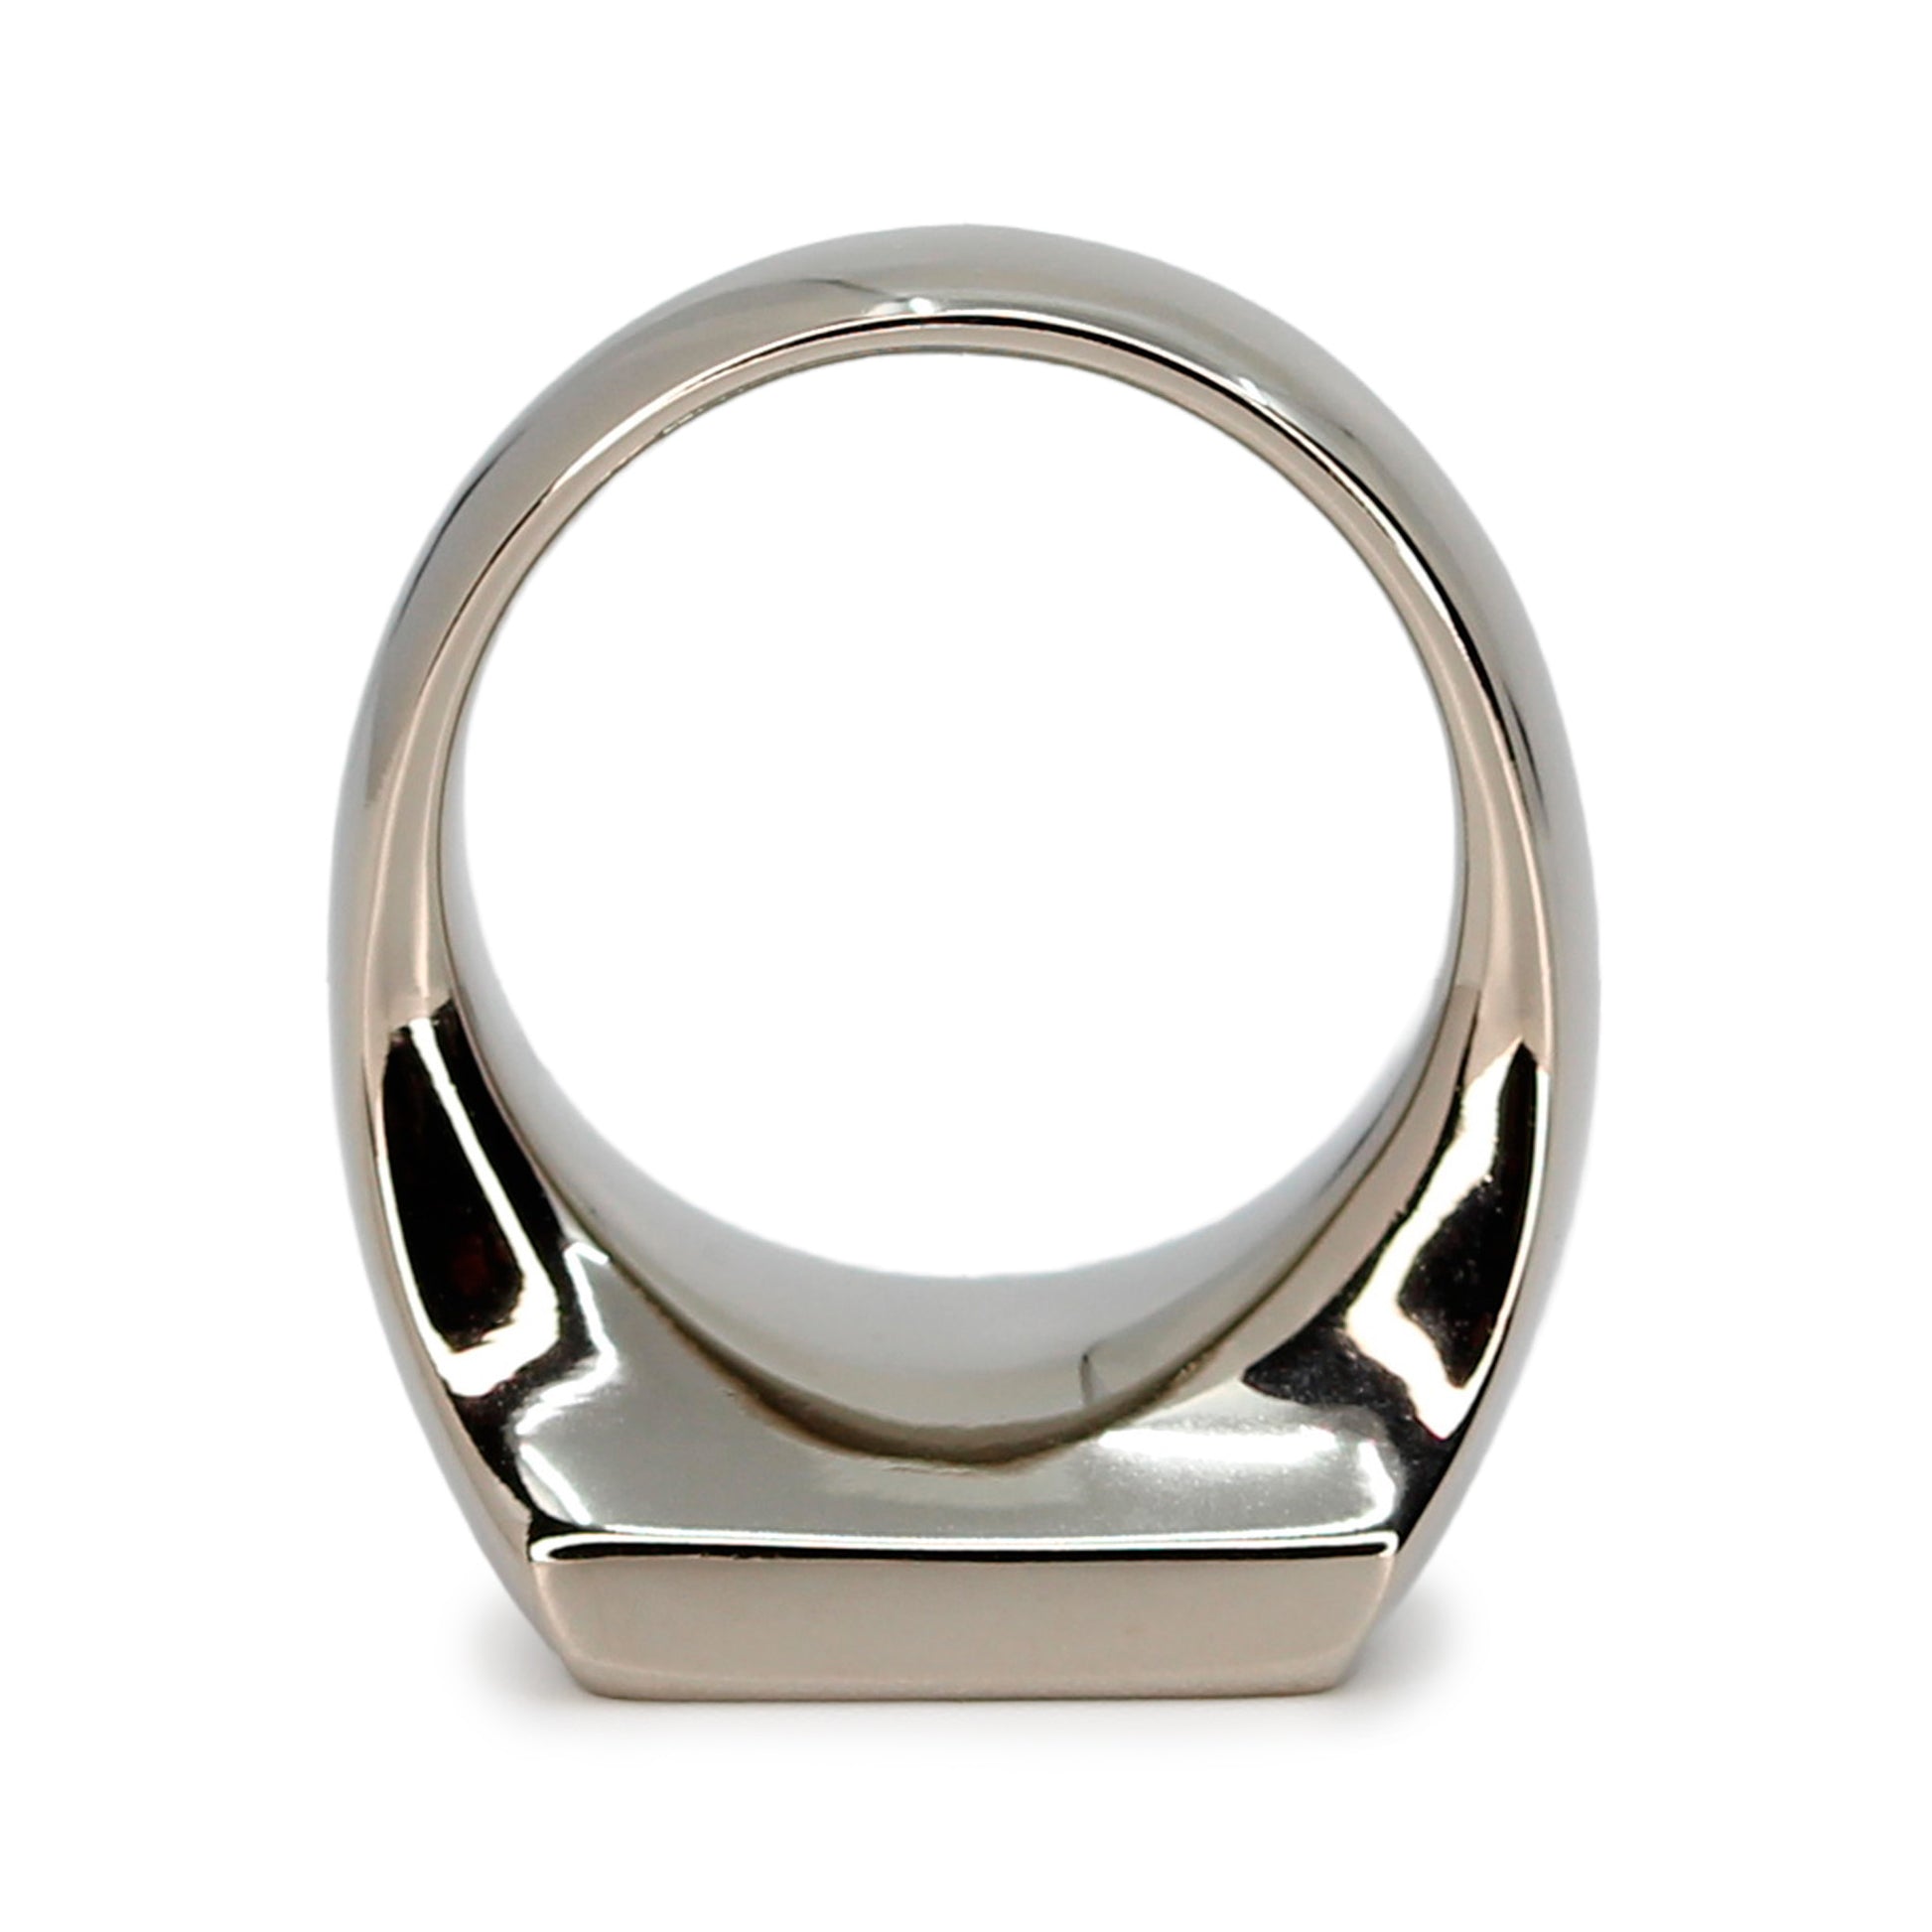 Single silver-colored titanium signet ring, 15x15 mm wide surface. Image shows view of the ring front facing down.